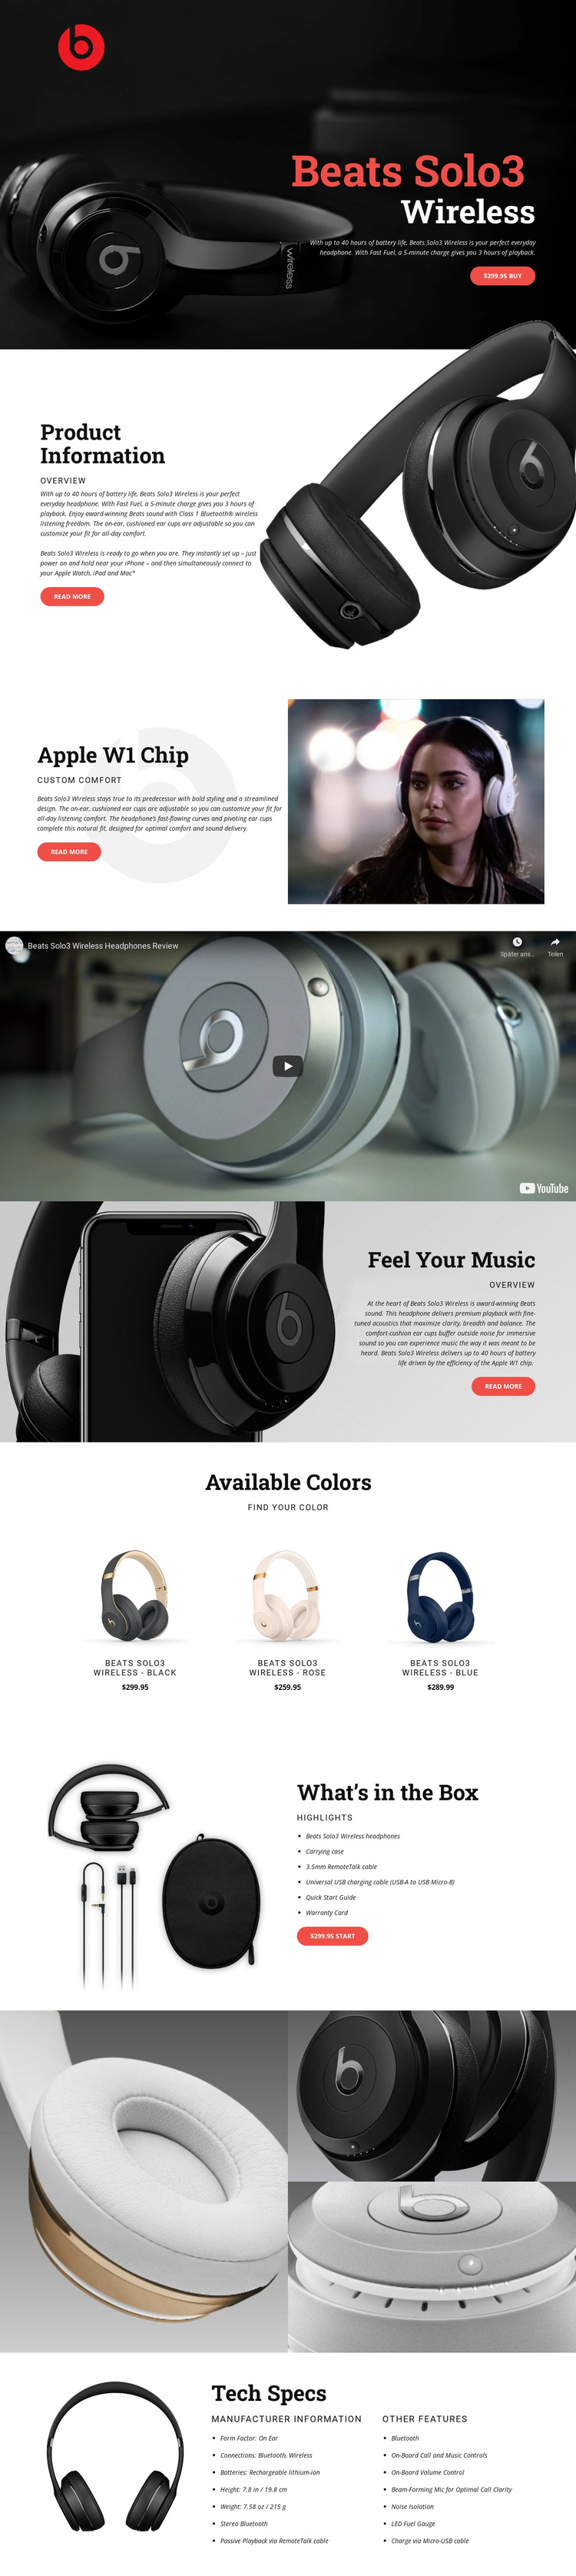 Outstanding quality of music HTML5 Template